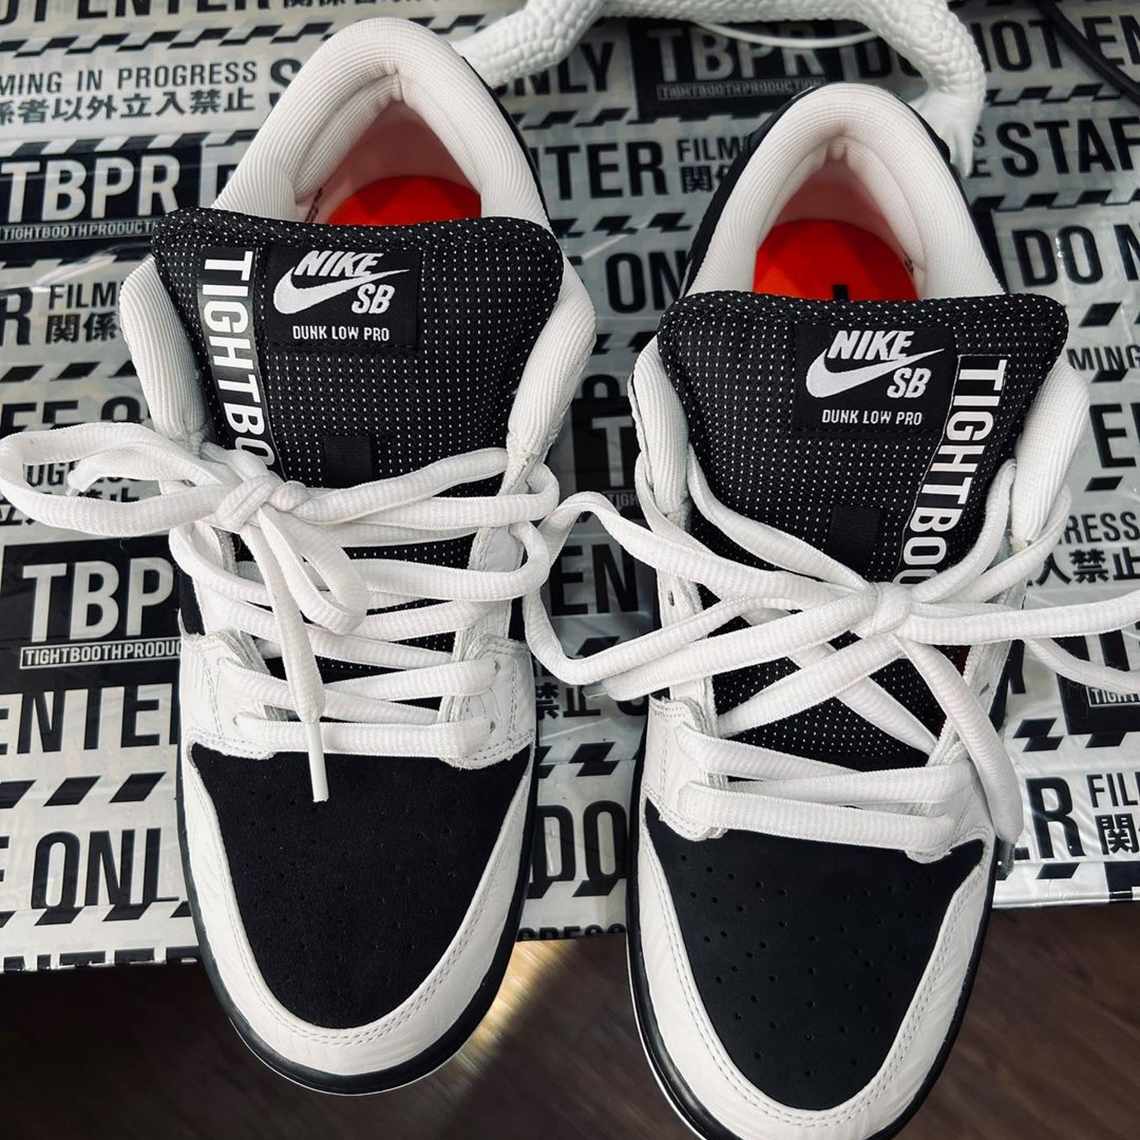 TIGHTBOOTH Nike table SB Dunk Low Release Info 2